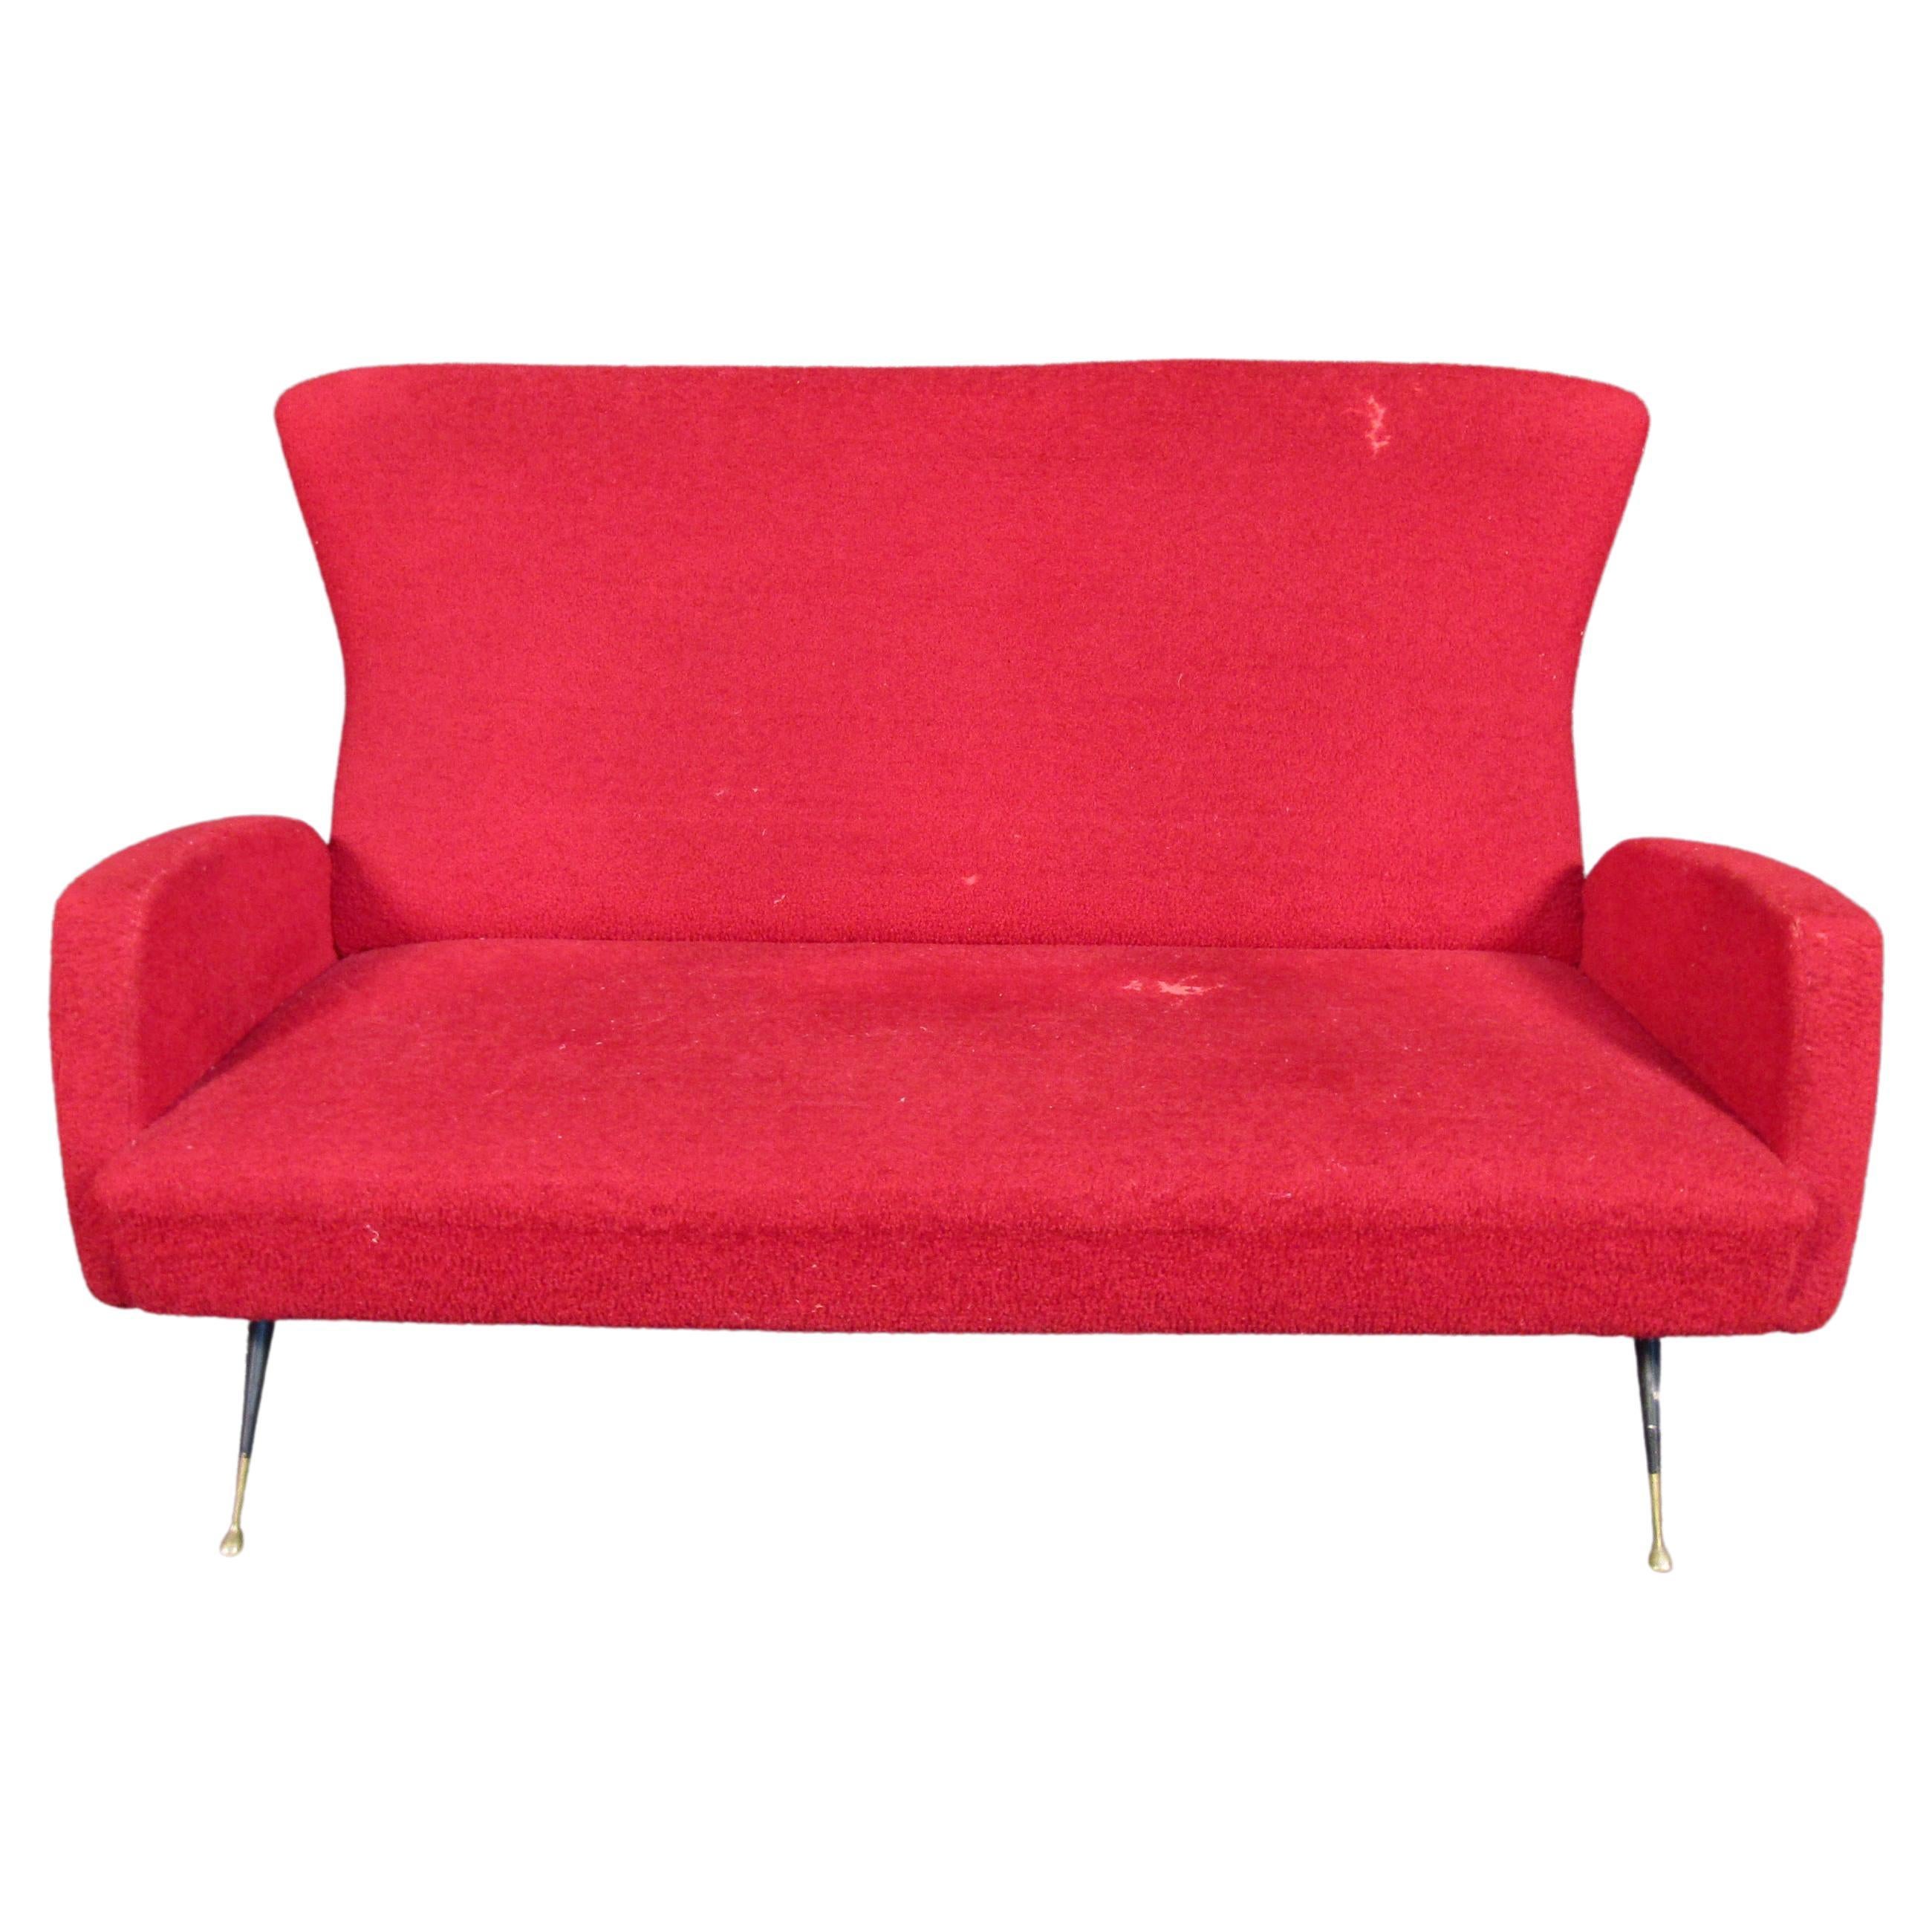 Unique Vintage Wingback Red Loveseat For Sale